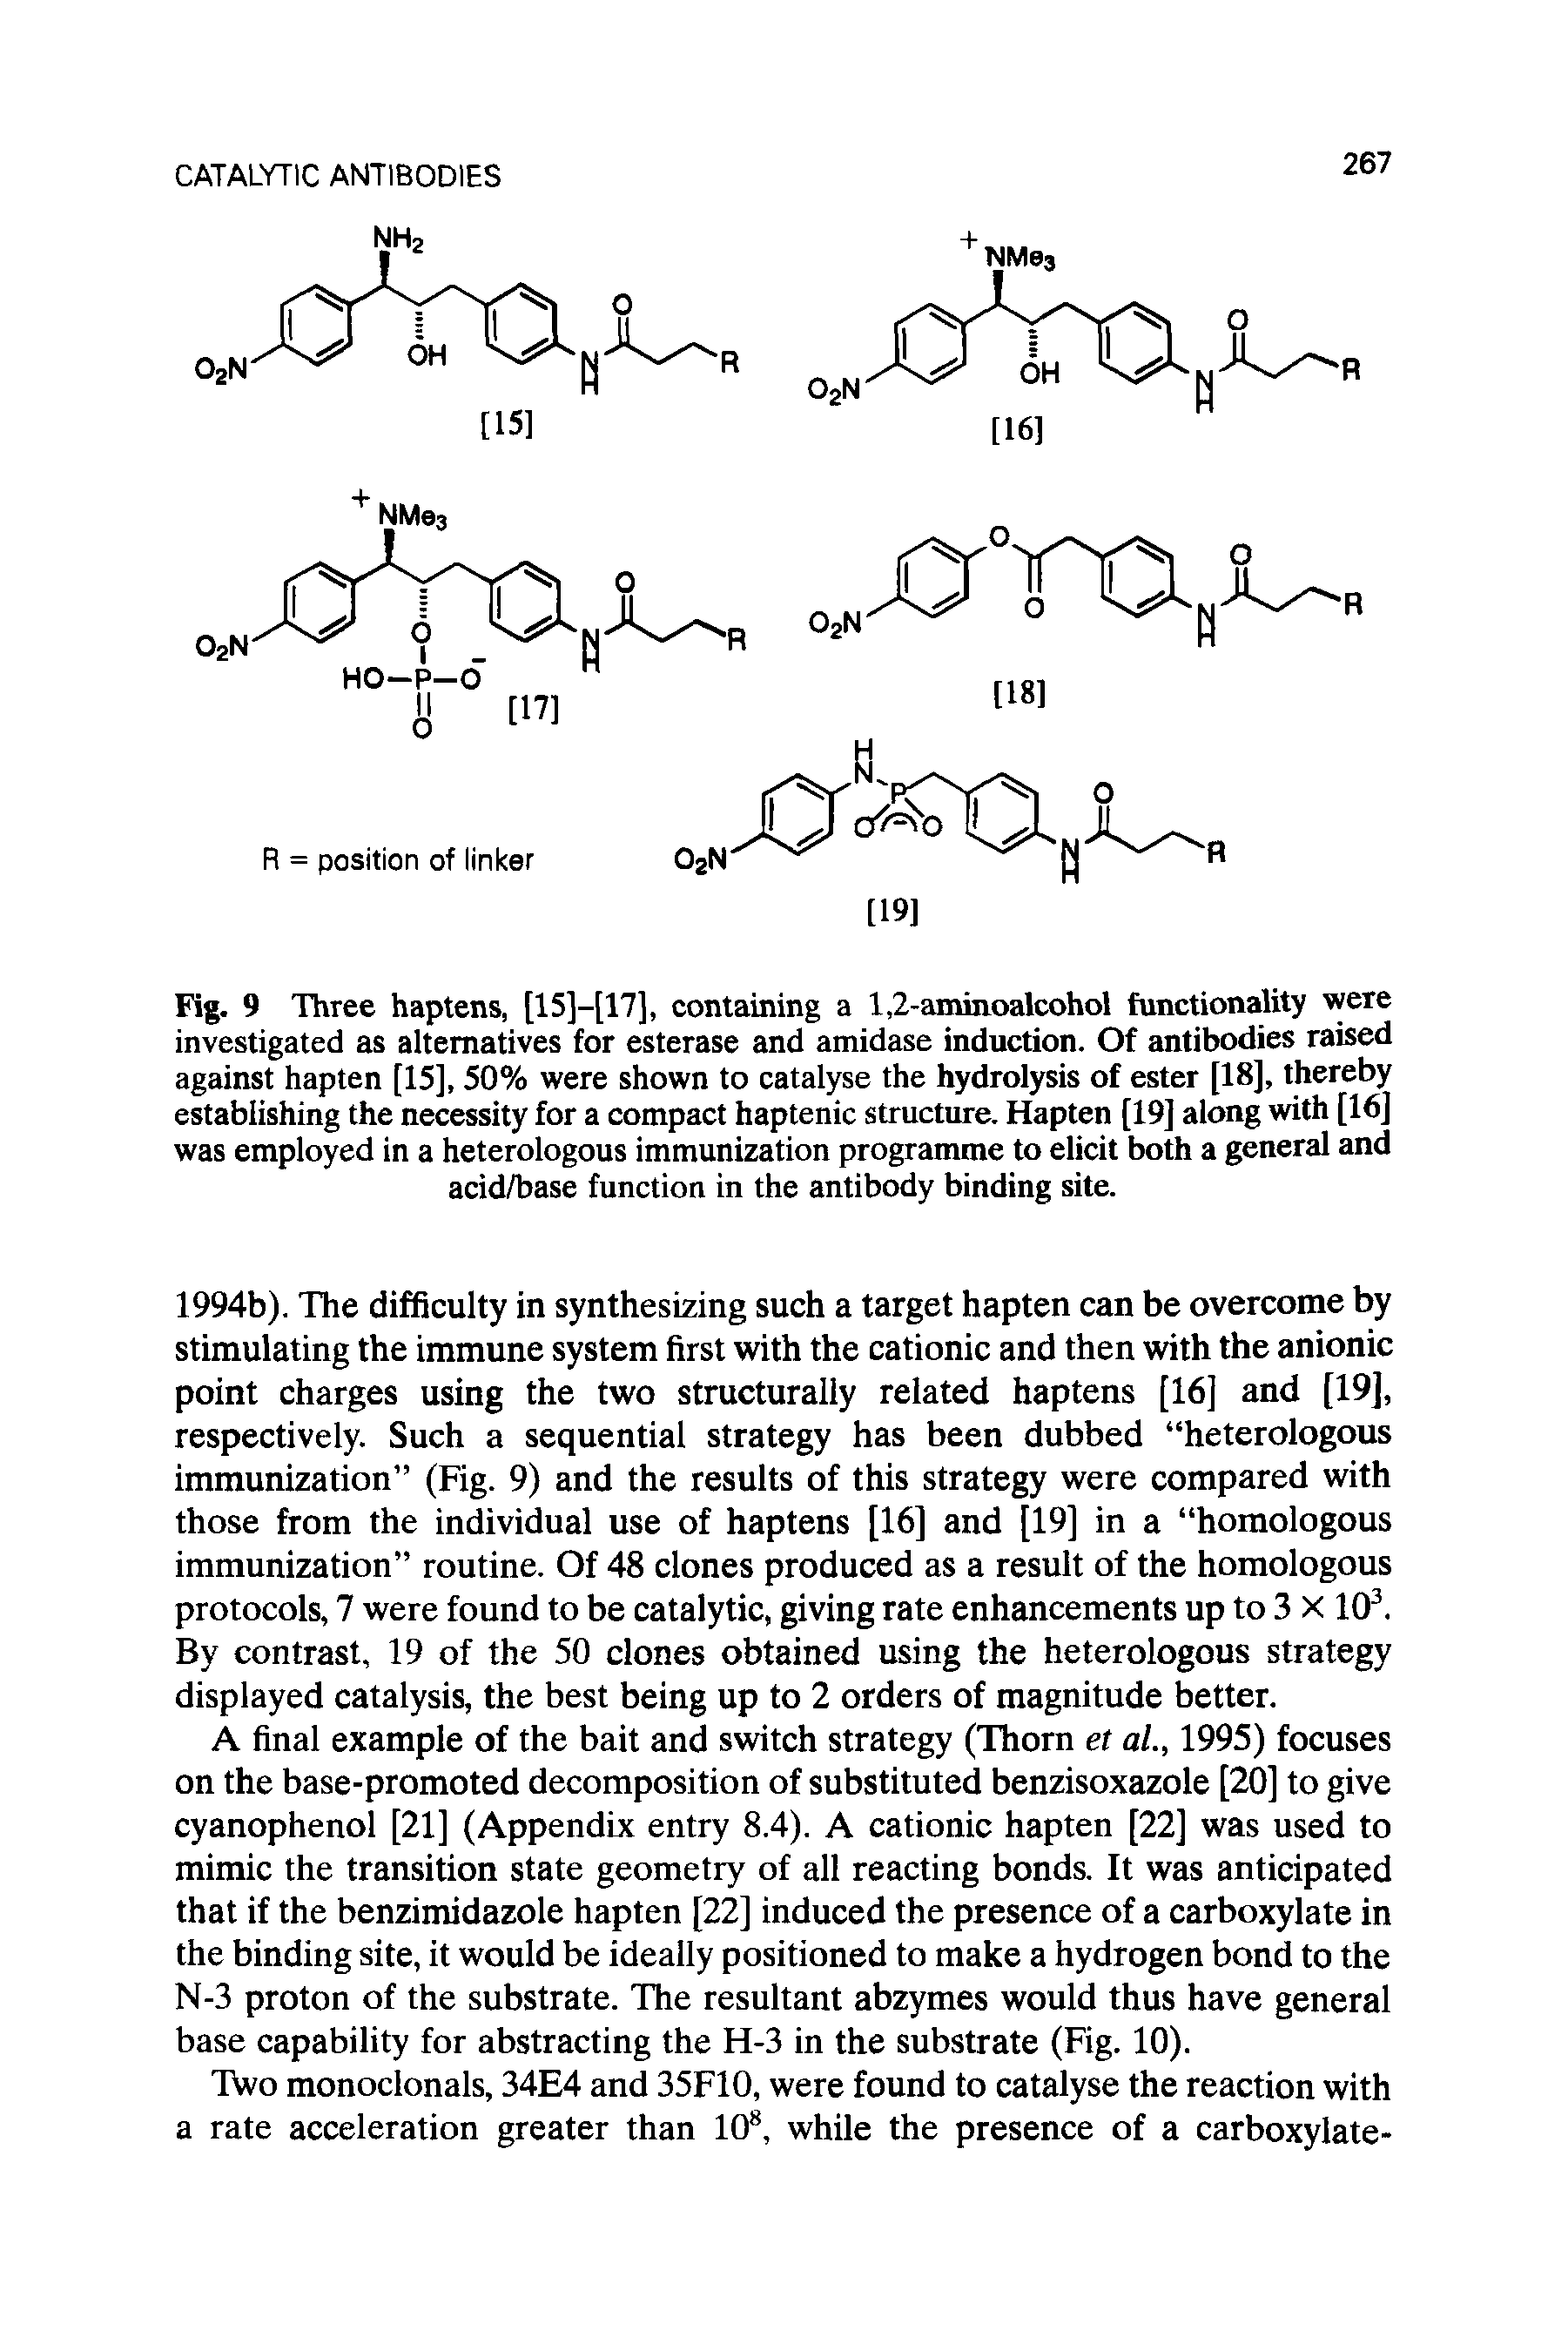 Fig. 9 Three haptens, [15]—[17], containing a 1,2-aminoalcohol functionality were investigated as alternatives for esterase and amidase induction. Of antibodies raised against hapten [15], 50% were shown to catalyse the hydrolysis of ester [18], thereby establishing the necessity for a compact haptenic structure. Hapten [19] along with [16] was employed in a heterologous immunization programme to elicit both a general and acid/base function in the antibody binding site.